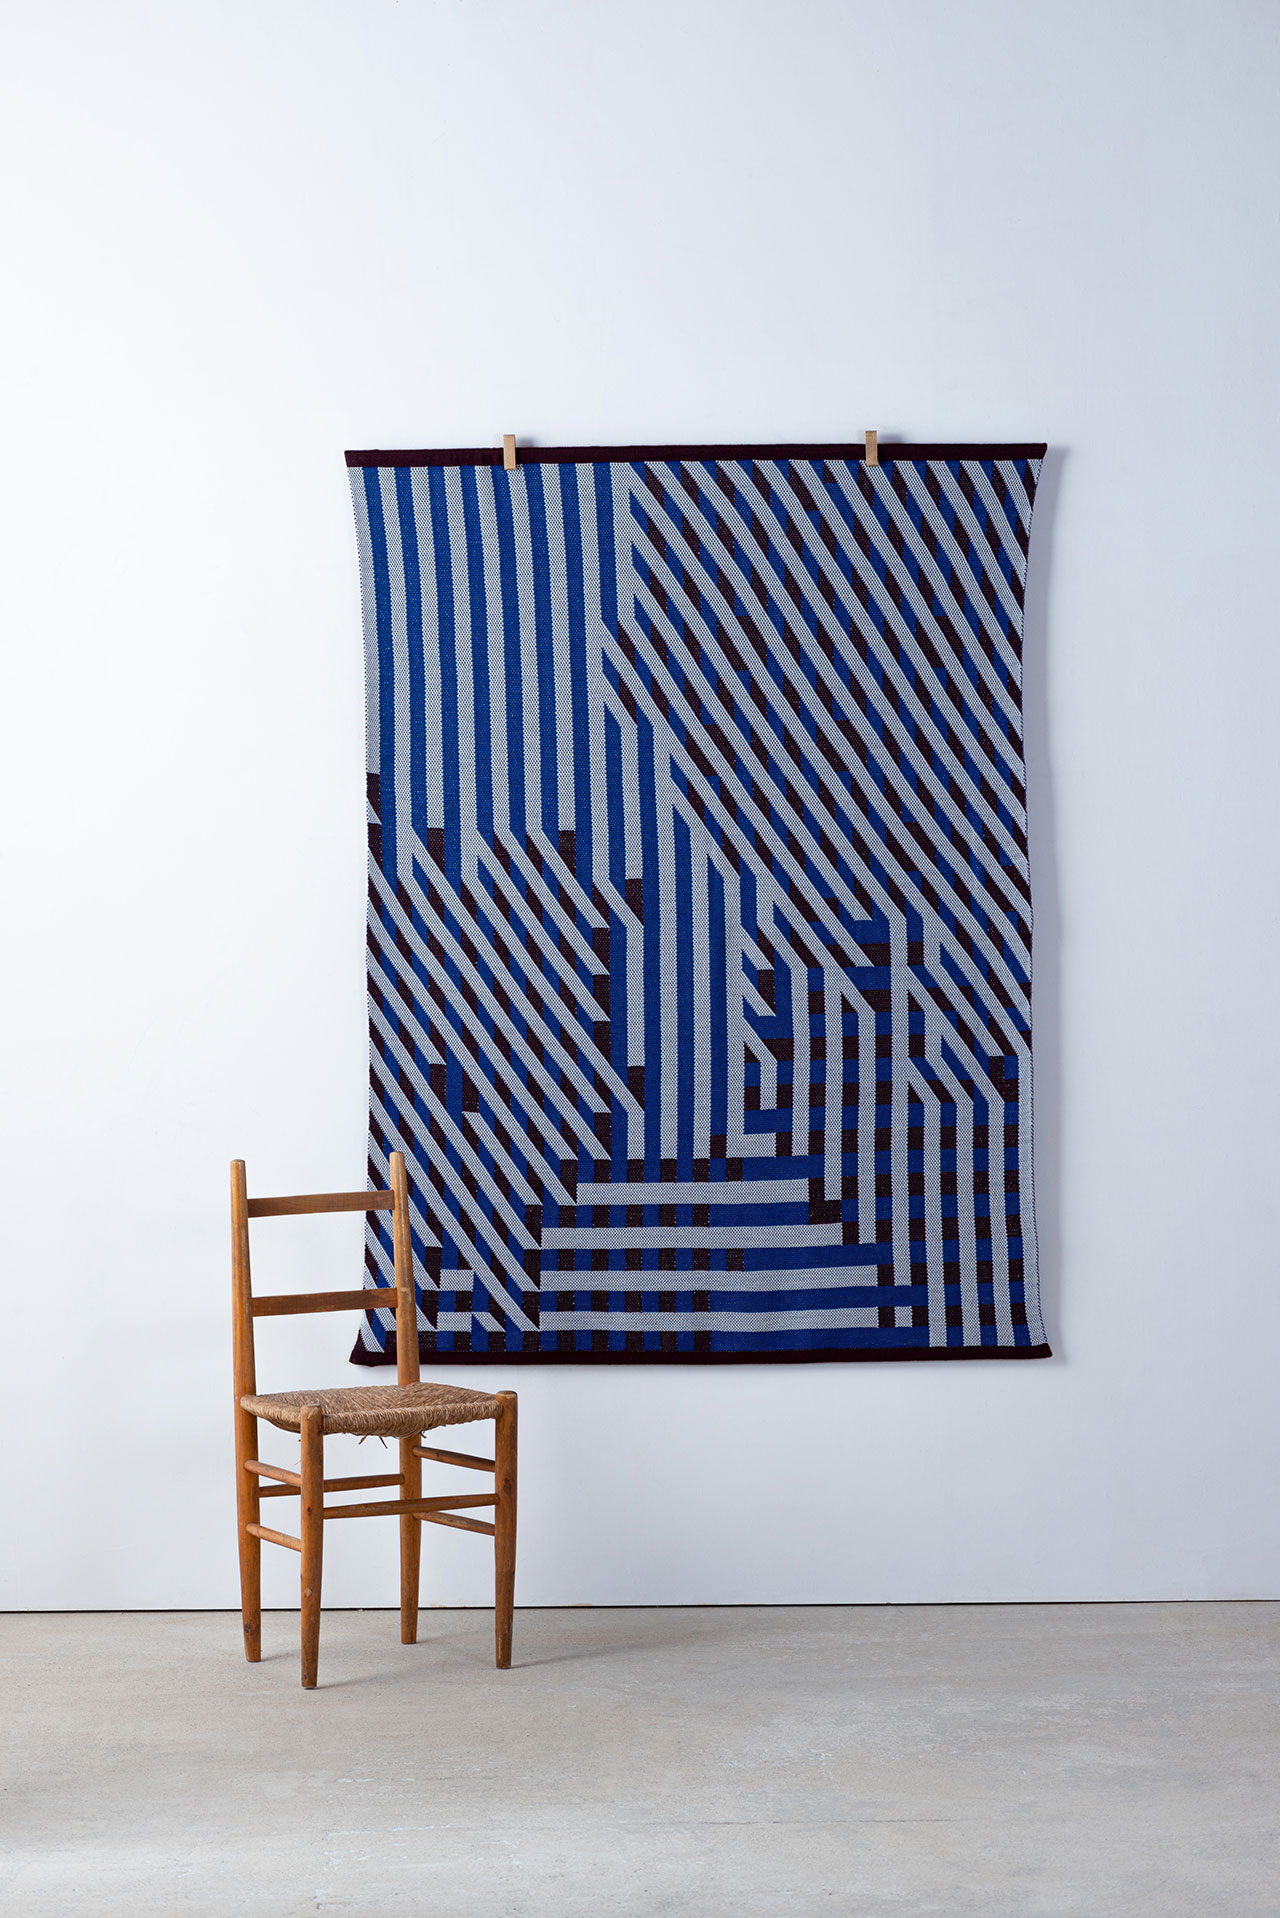 Erwan Bouroullec, RKWH 02 (Risk Knit Large - Navy, burgundy, beige), 2022.
Wool. 155× 130cm
From the Risk Knit series by Erwan Bouroullec.  Courtesy of Ronan &amp; Erwan Bouroullec studio.